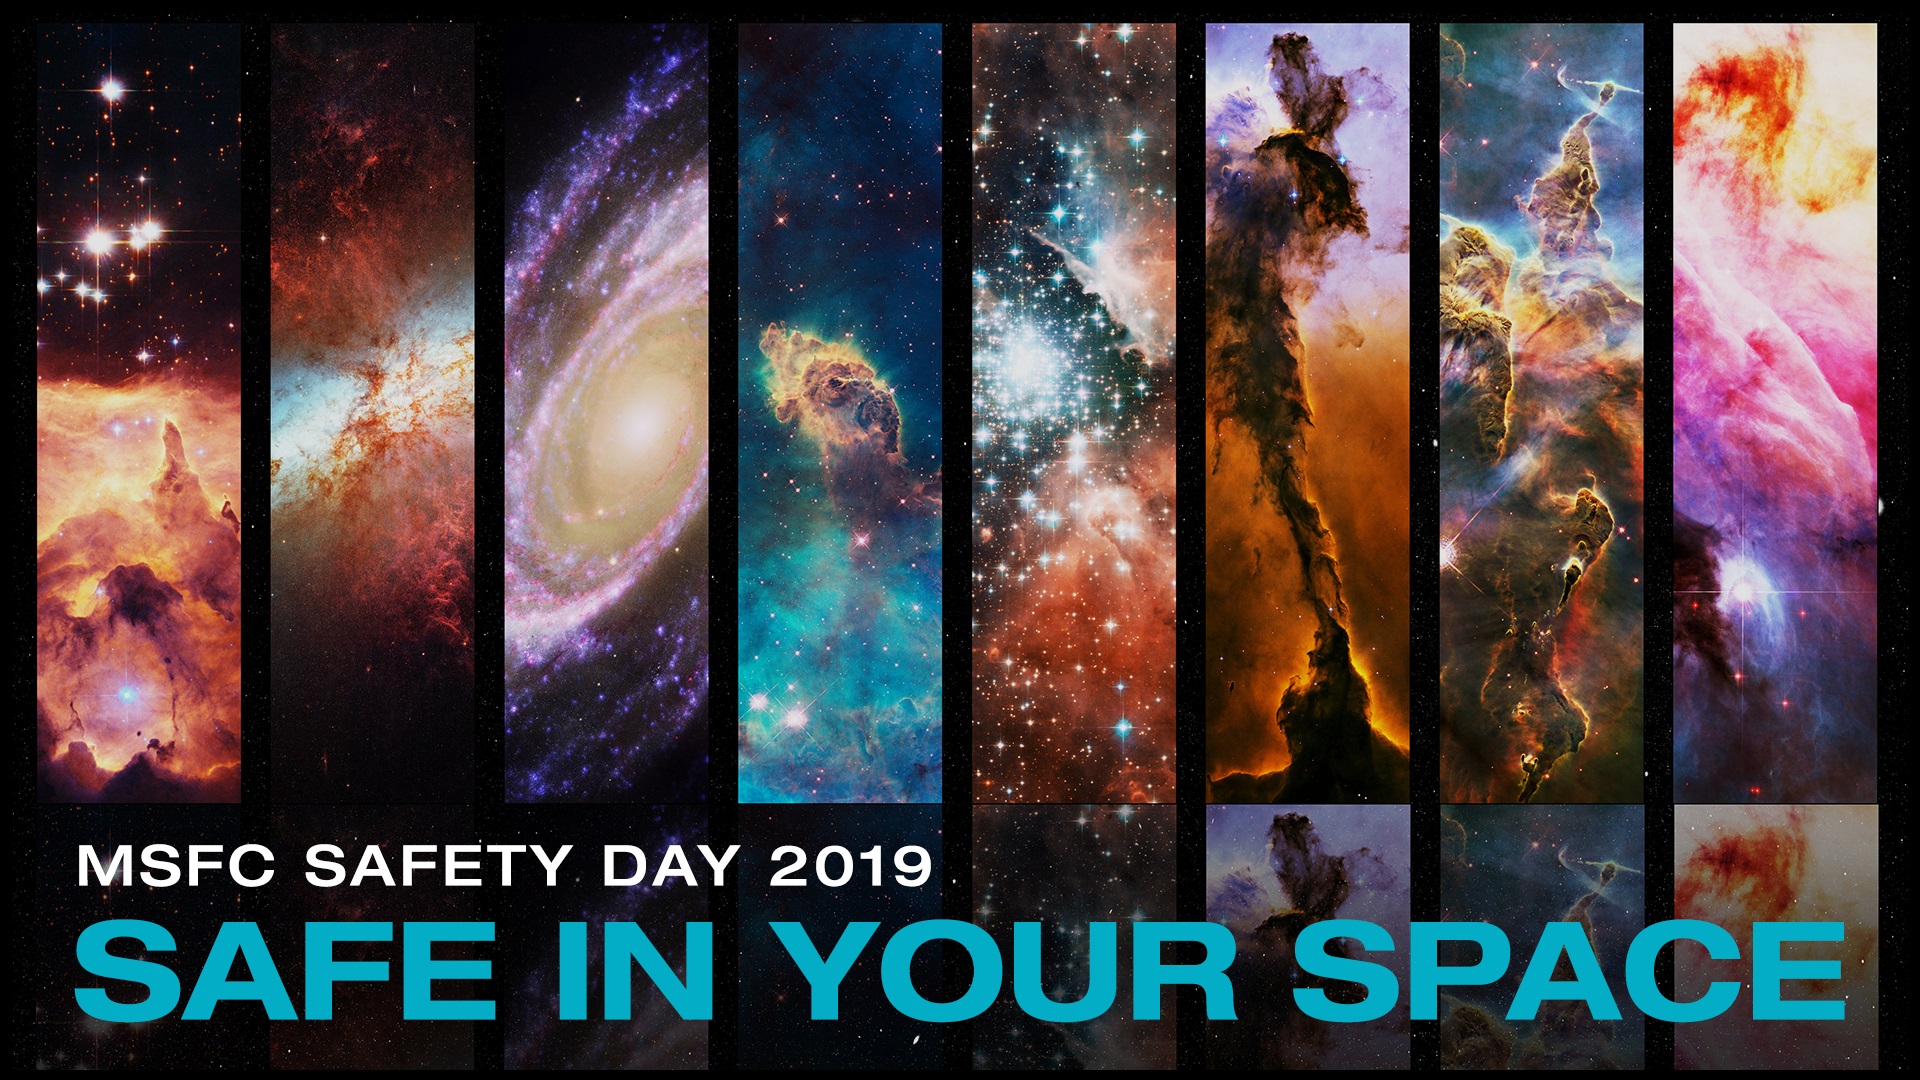 MSFC Safety Day 2019 graphic.